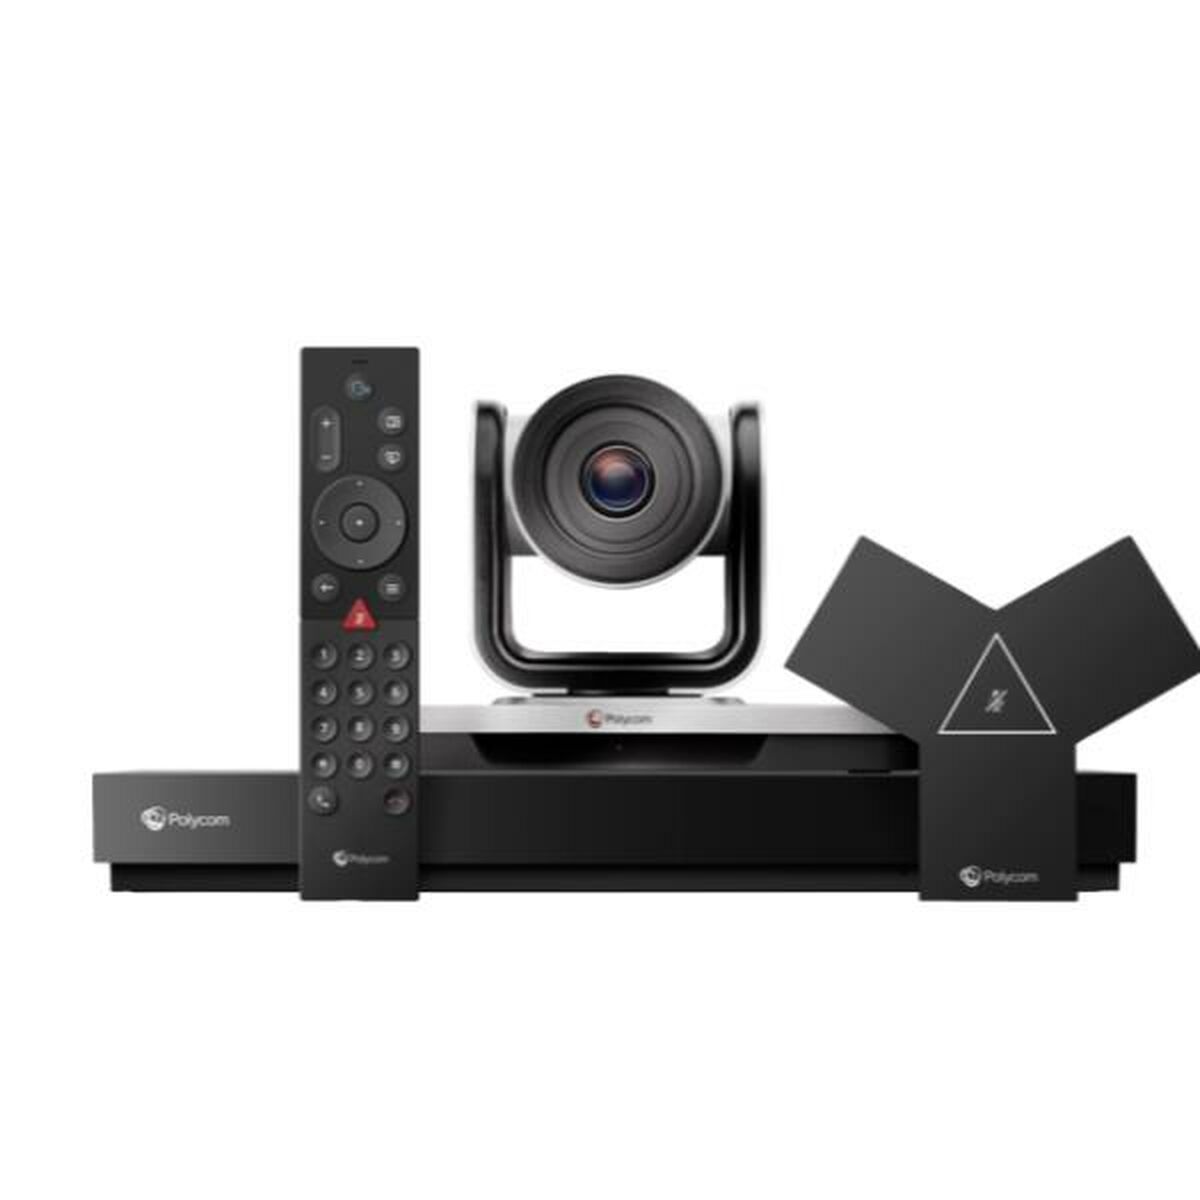 Video Conferencing System HP G7500 4K Ultra HD, HP, Computing, Accessories, video-conferencing-system-hp-g7500-4k-ultra-hd, Brand_HP, category-reference-2609, category-reference-2642, category-reference-2844, category-reference-t-19685, category-reference-t-19908, category-reference-t-21340, category-reference-t-25568, computers / peripherals, Condition_NEW, office, Price_+ 1000, Teleworking, RiotNook